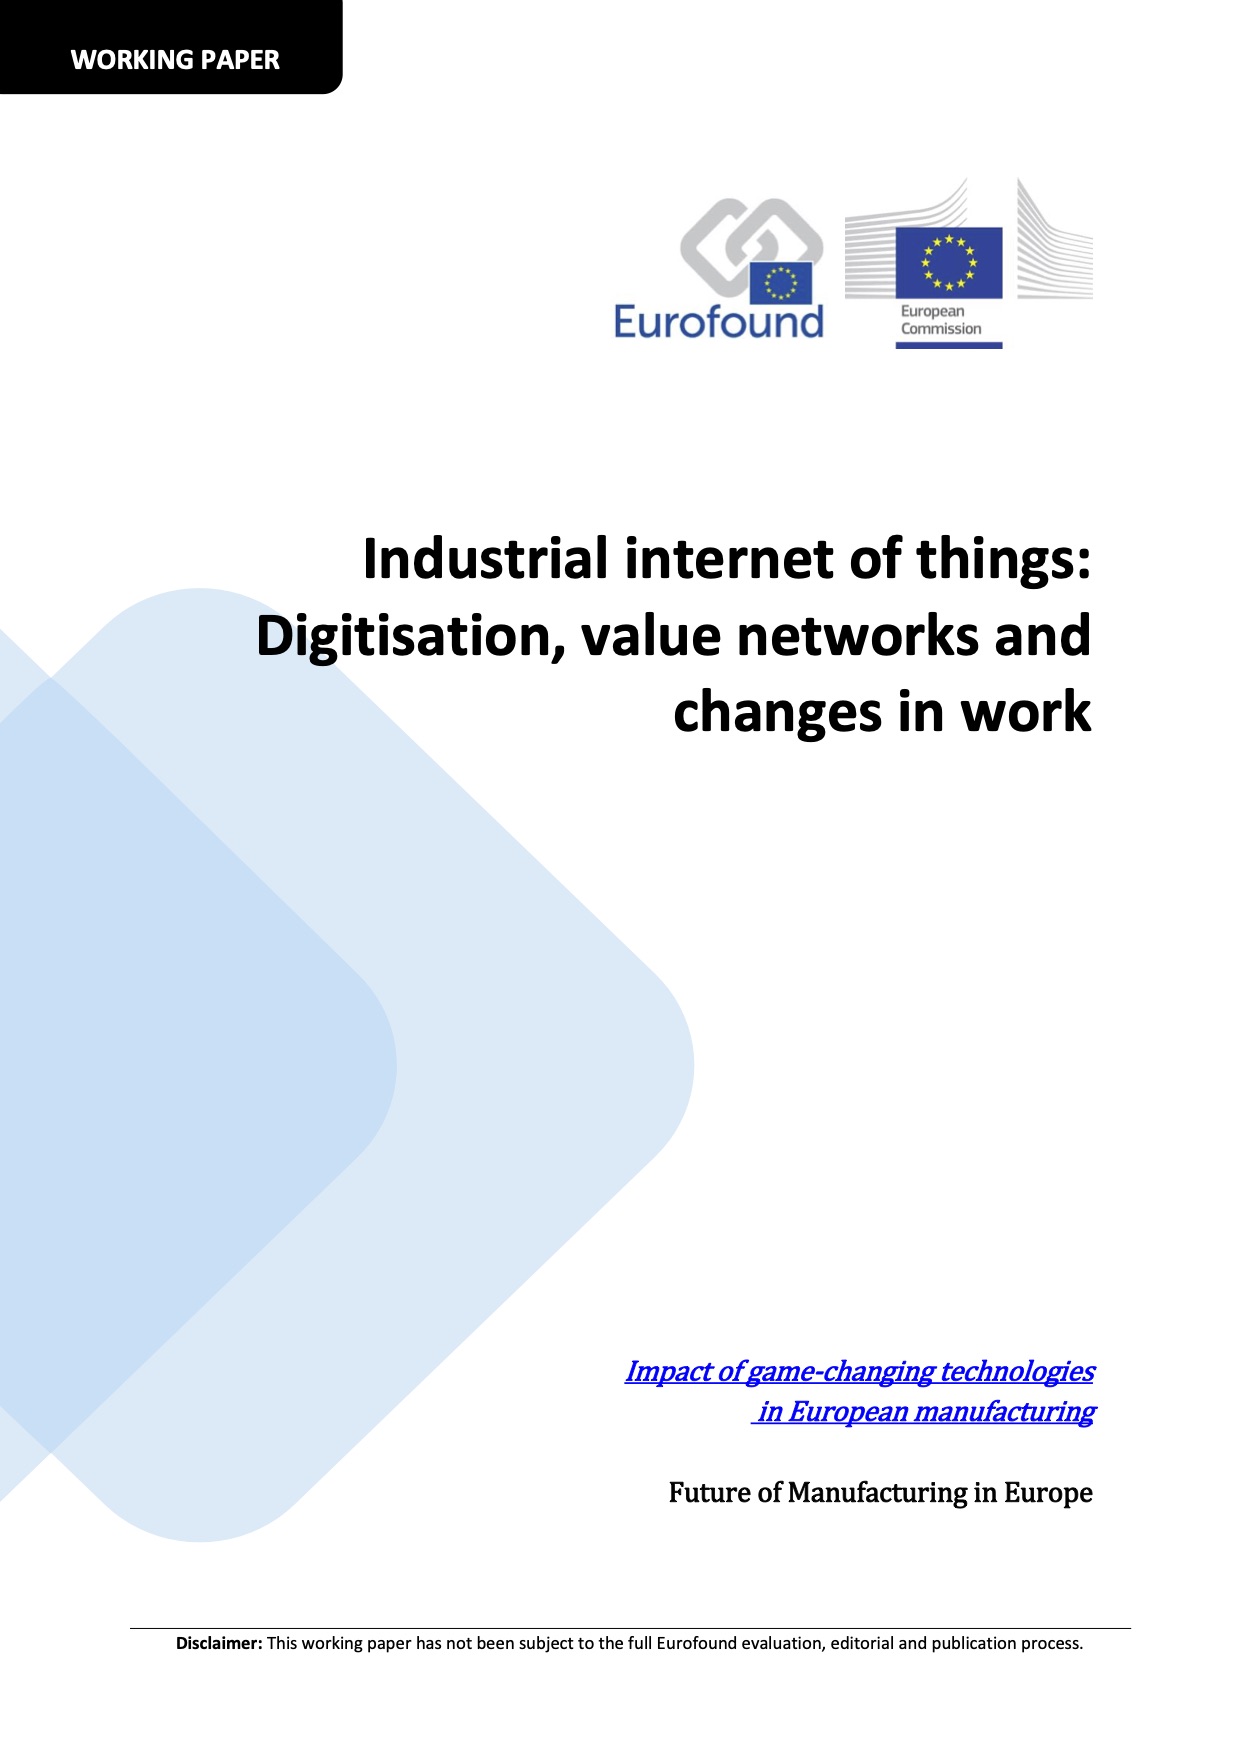 Industrial internet of things: Digitisation, value networks and changes in work